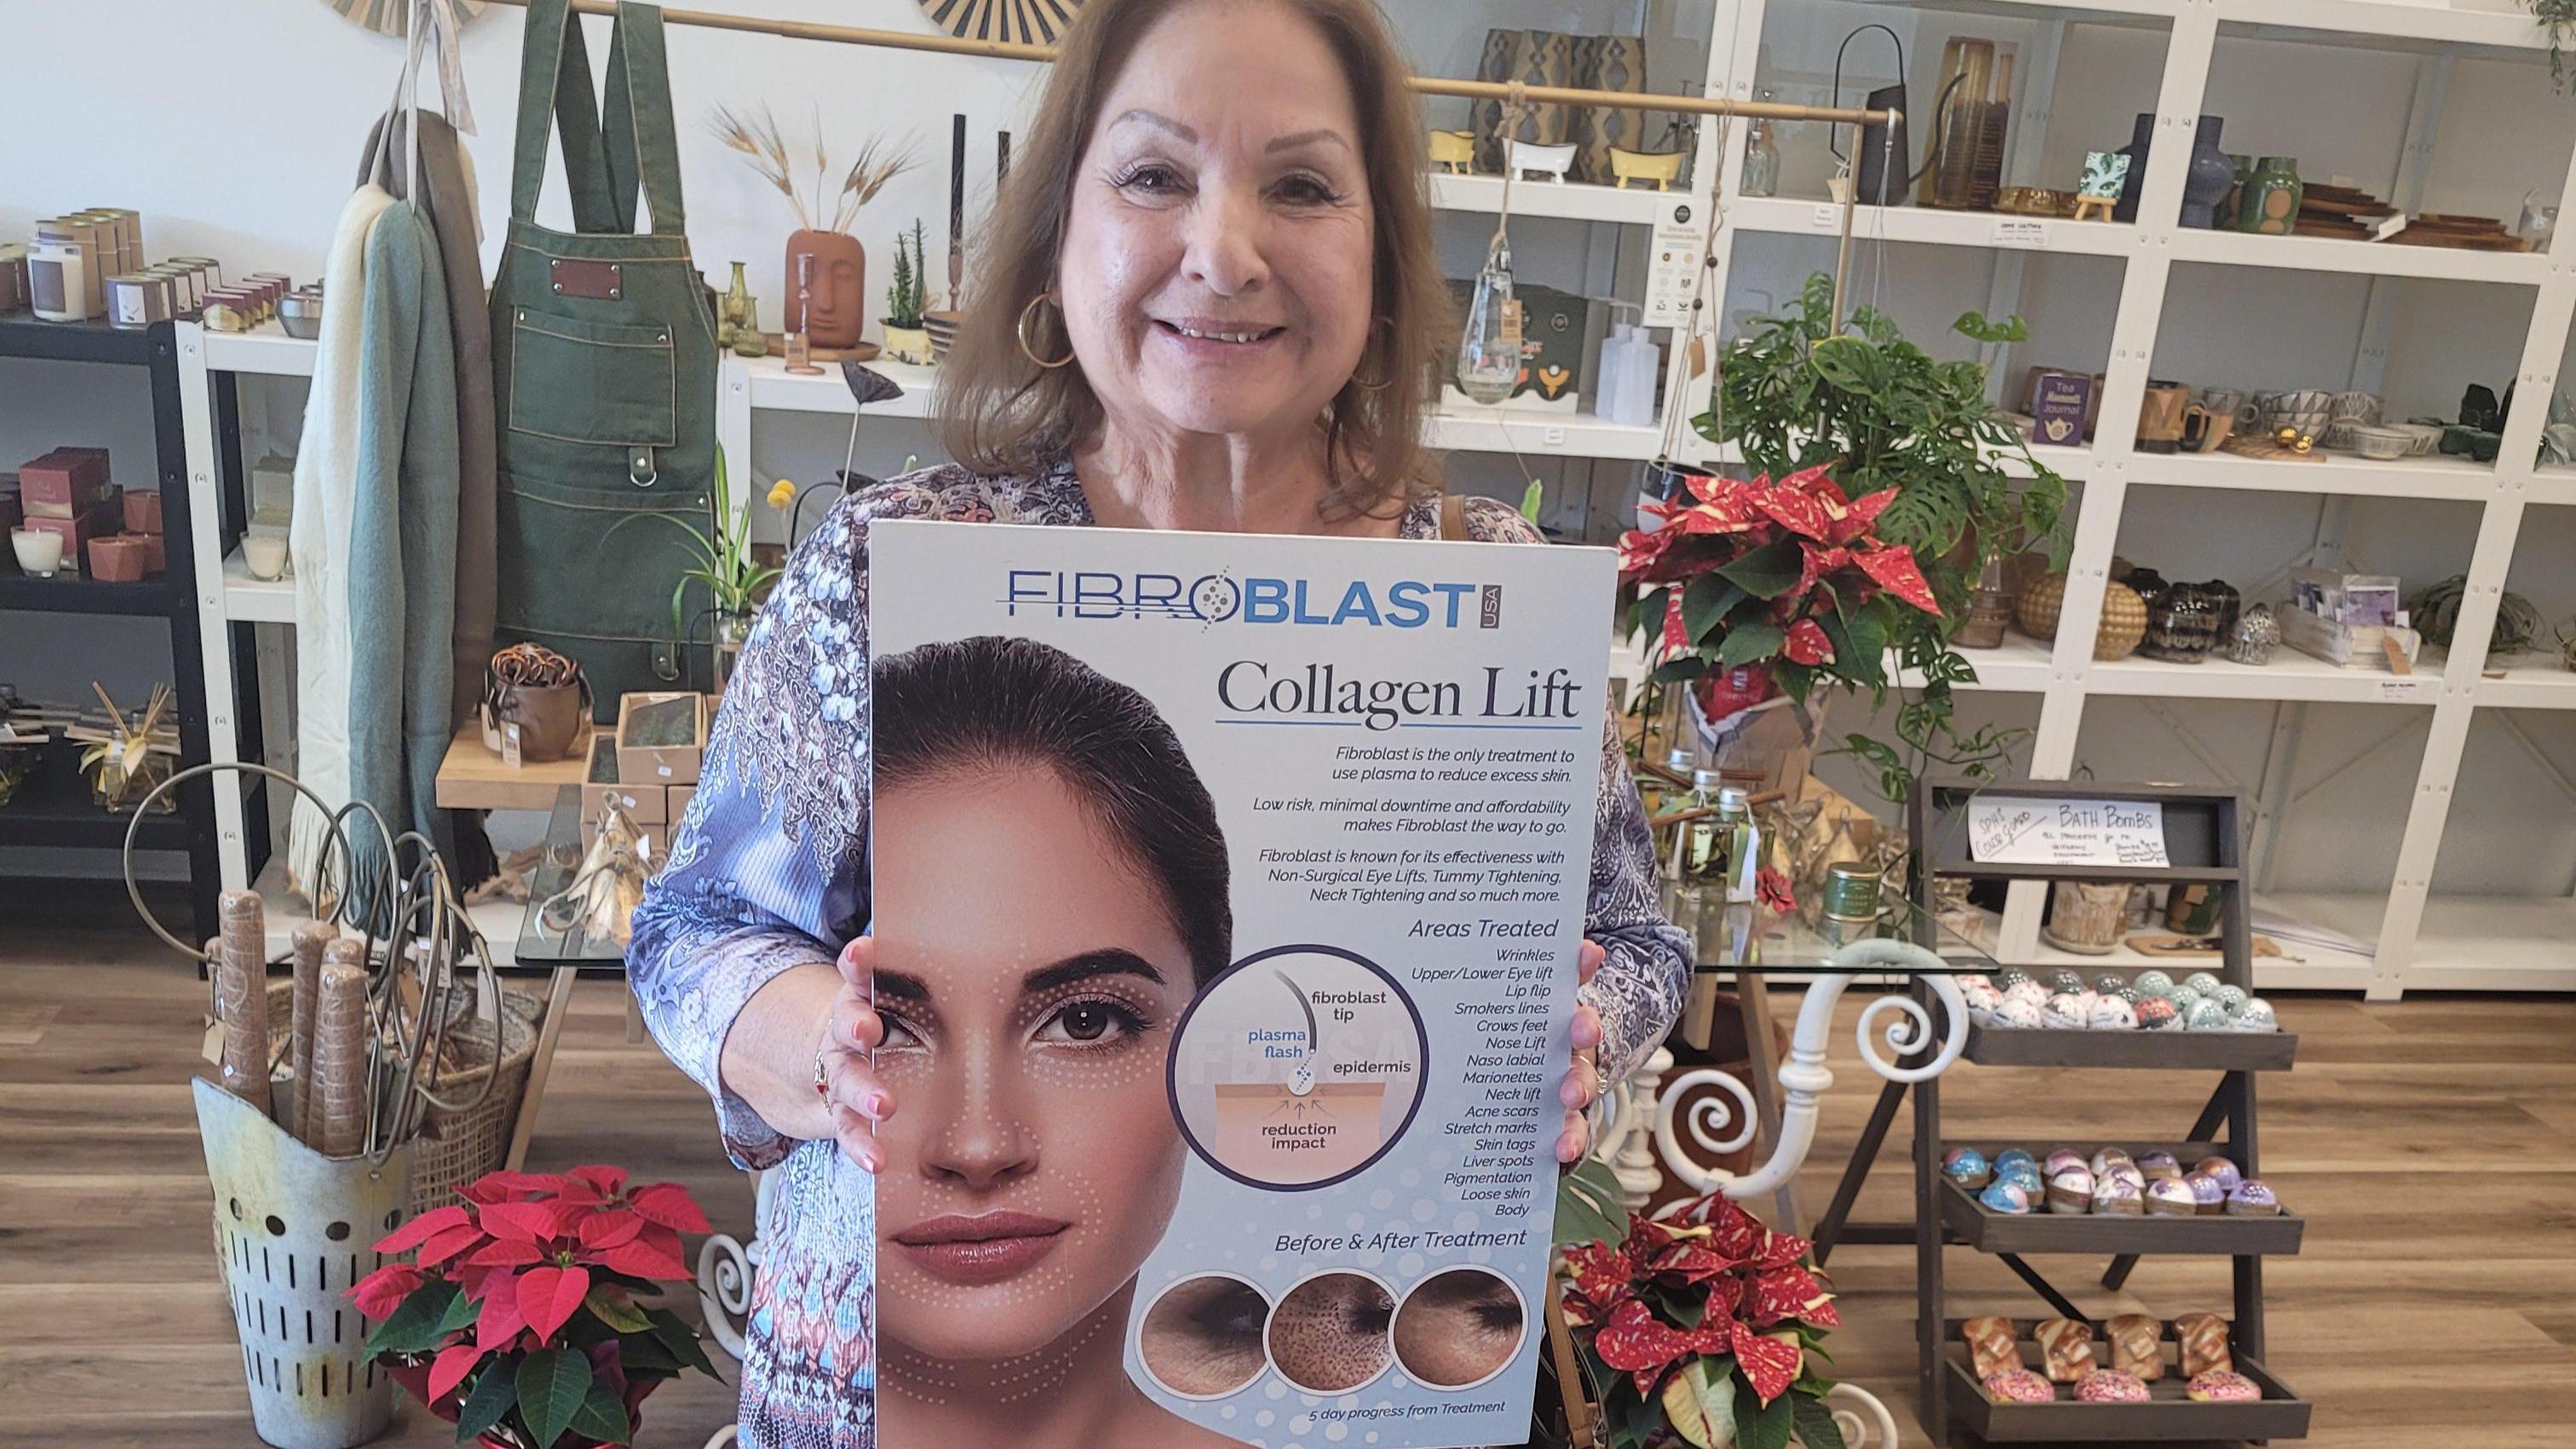 Instead of botox, come and try Fibroblast Collagen Lift. Book your appointment today at 442-899-8819.